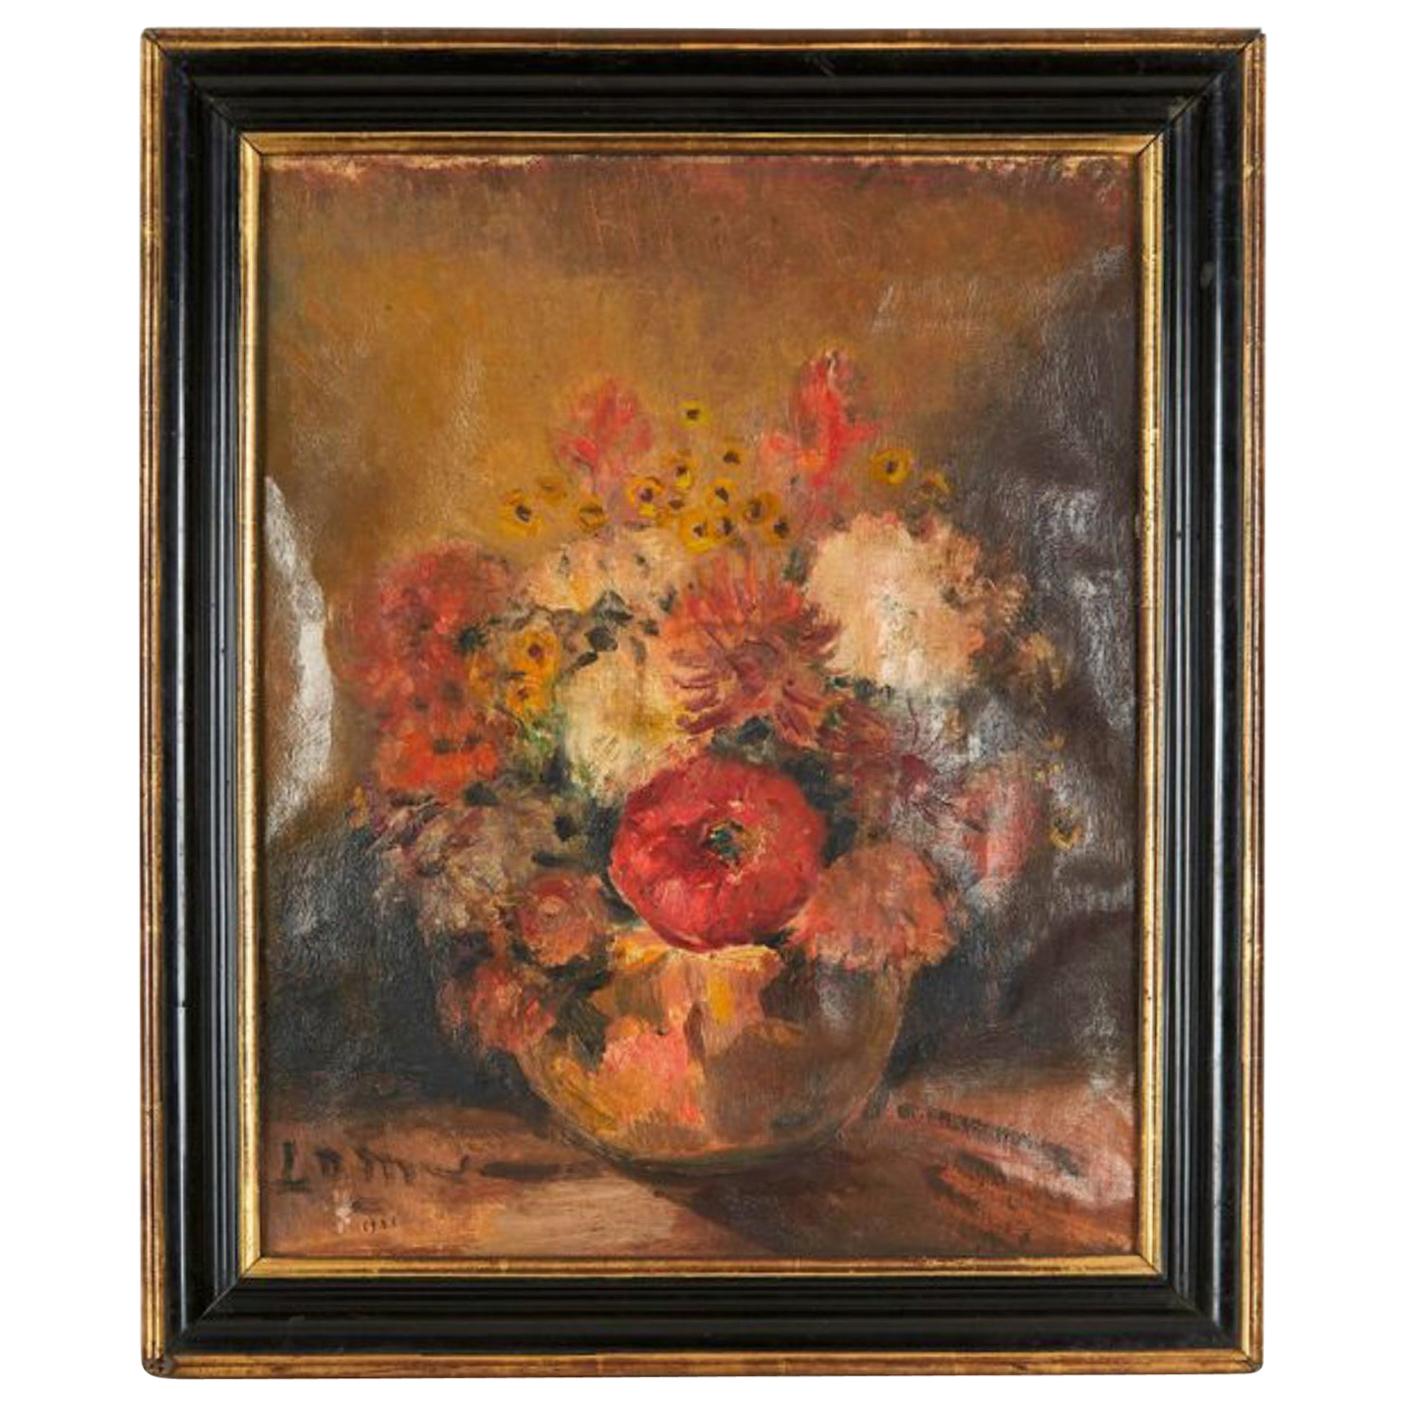 20th Century French School Flowers Oil on Canvas, Signed